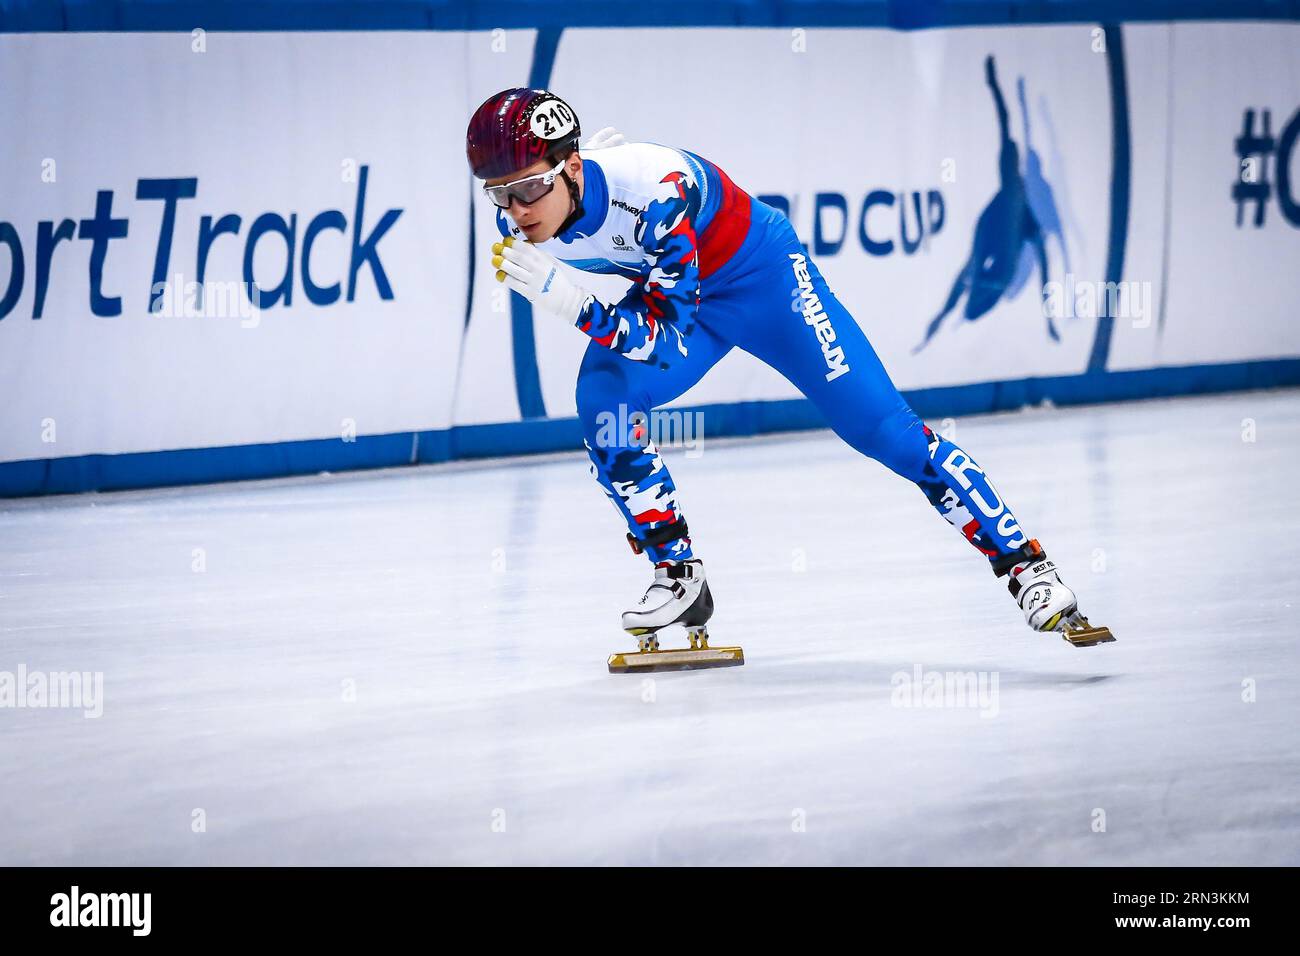 Dresden, Germany, February 03, 2019: male speed skater Daniil Eybog of Russia competes during the ISU Short Track Speed Skating World Championship Stock Photo